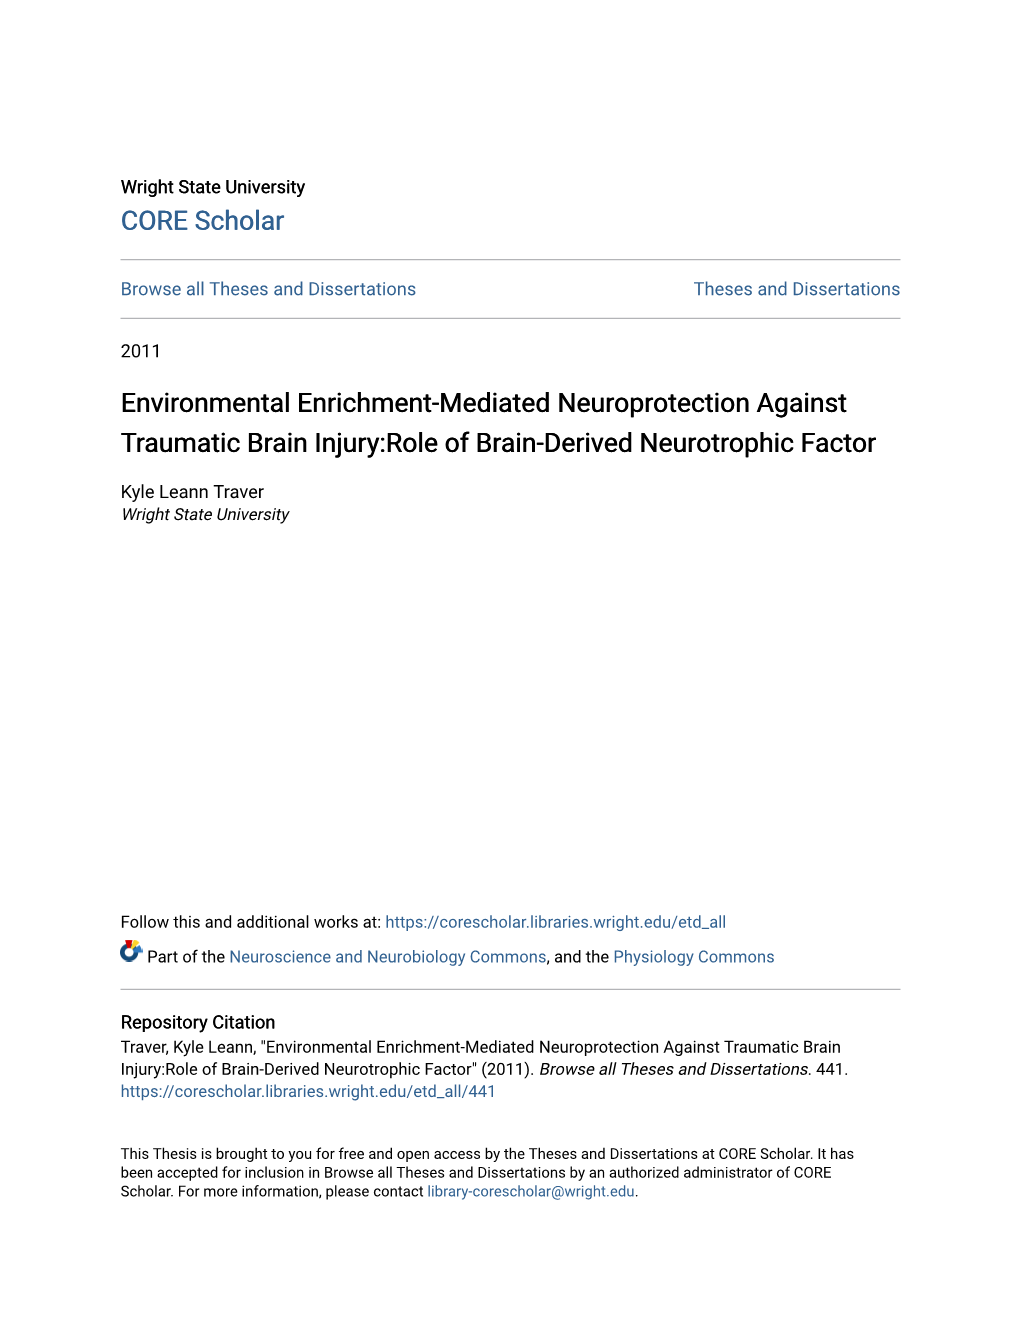 Environmental Enrichment-Mediated Neuroprotection Against Traumatic Brain Injury:Role of Brain-Derived Neurotrophic Factor